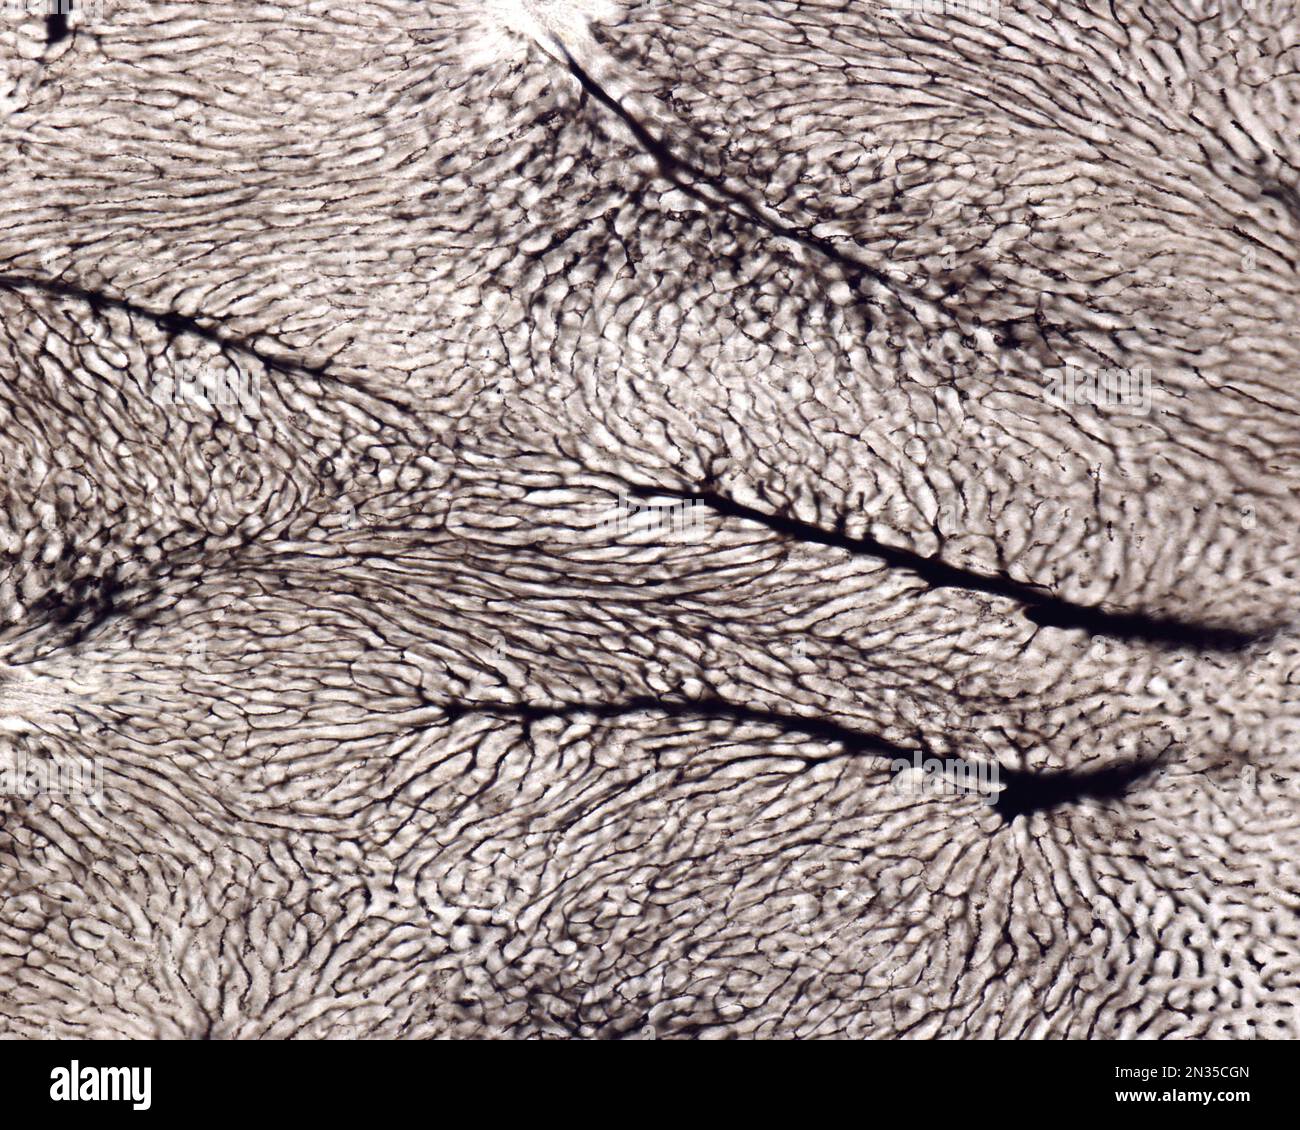 The study of an organ microvasculature usually implies the filling of blood vessels with a label visible under the microscope. Light micrograph of liv Stock Photo